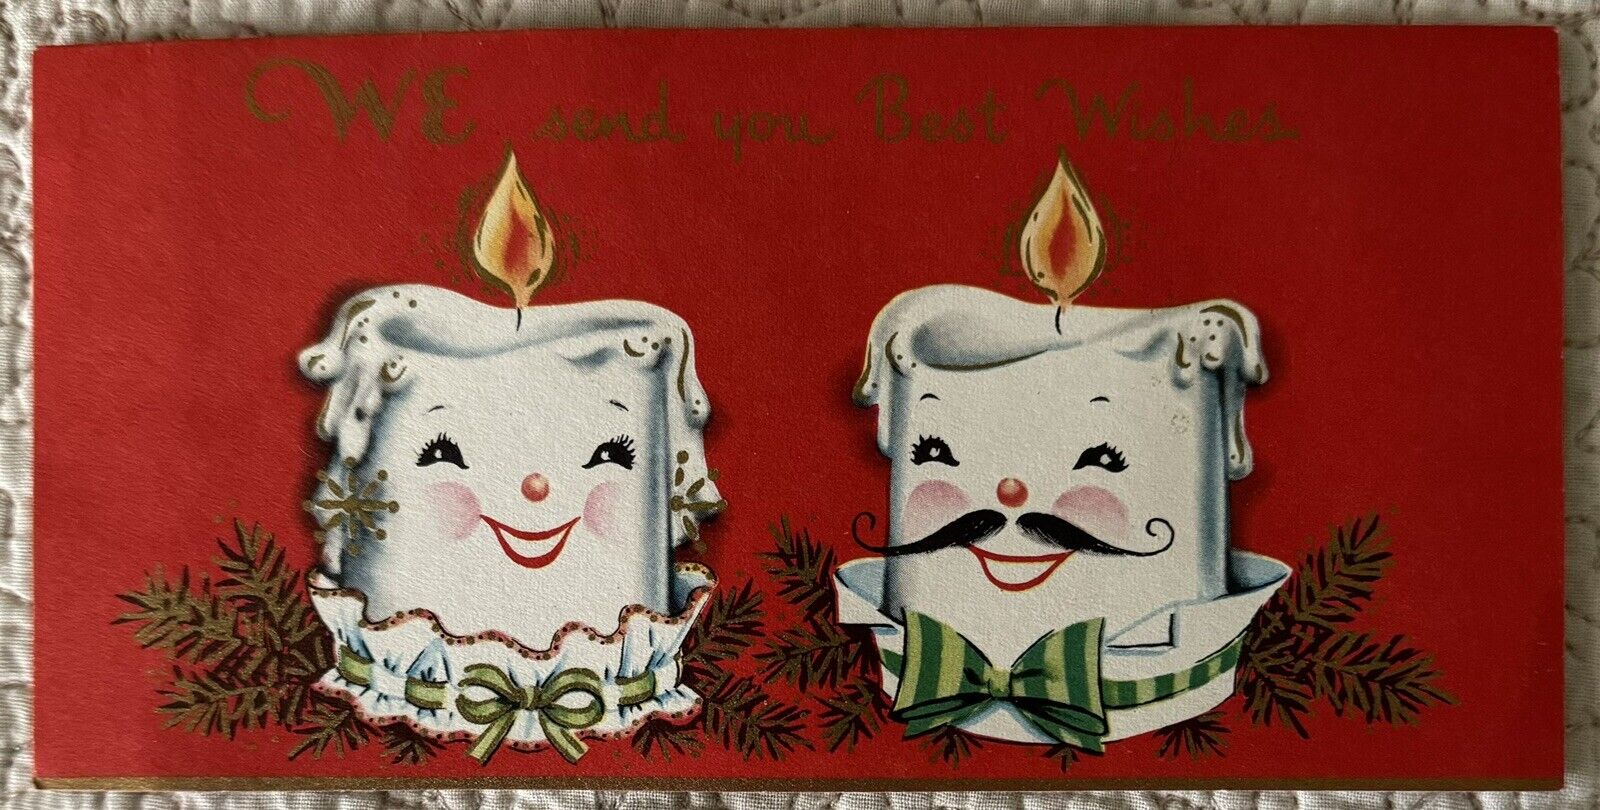 Vintage Christmas Candle Man Woman Anthropomorphic Greeting Card 1950s 1960s